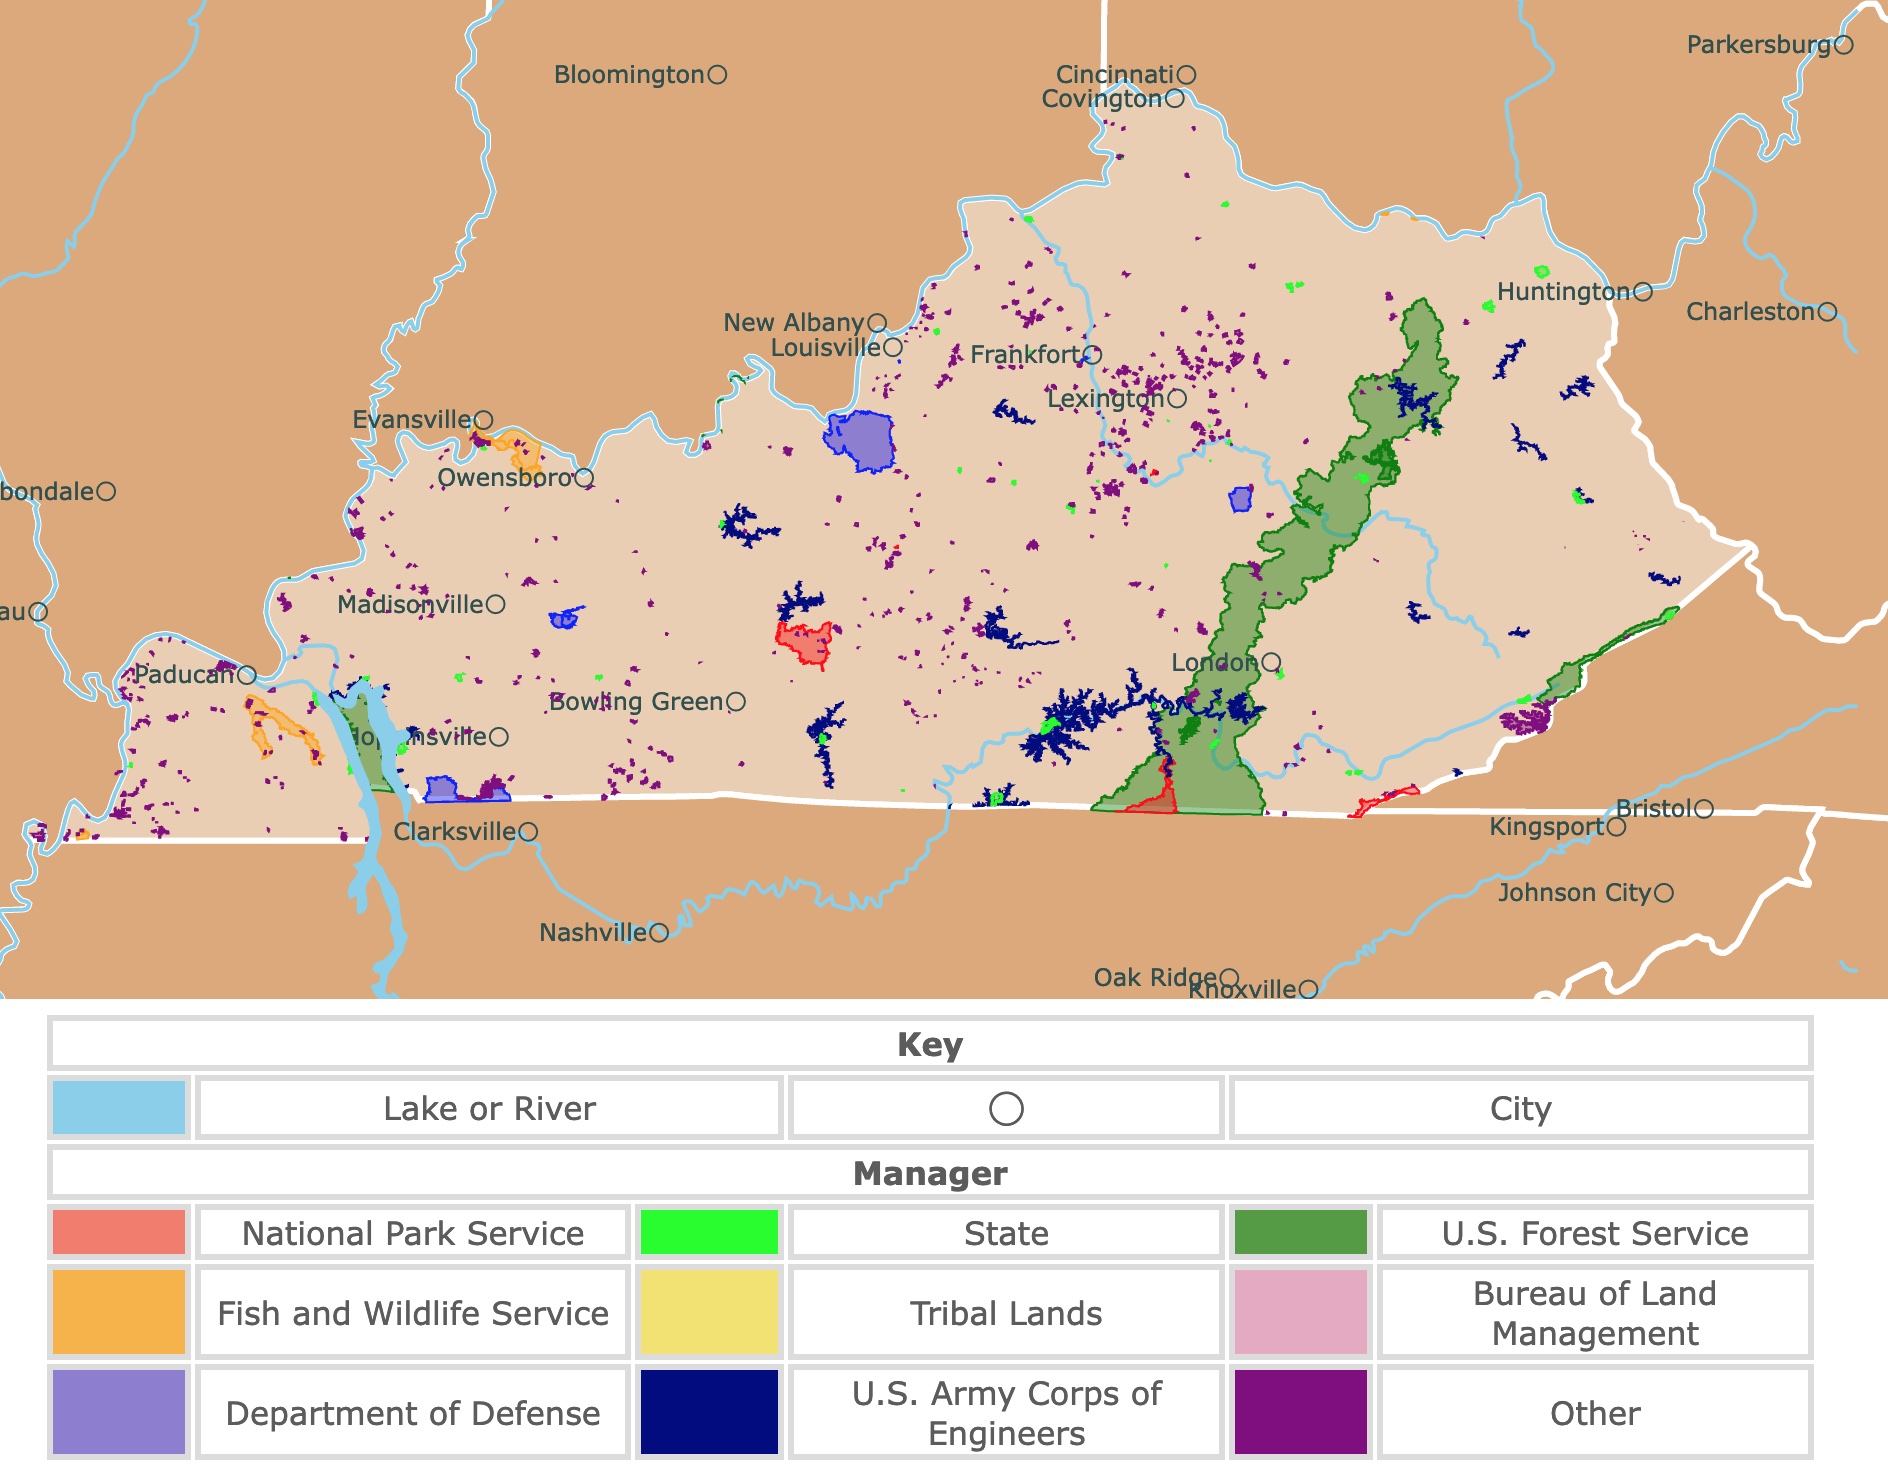 Map of Kentucky's state parks, national parks, forests, and public lands areas